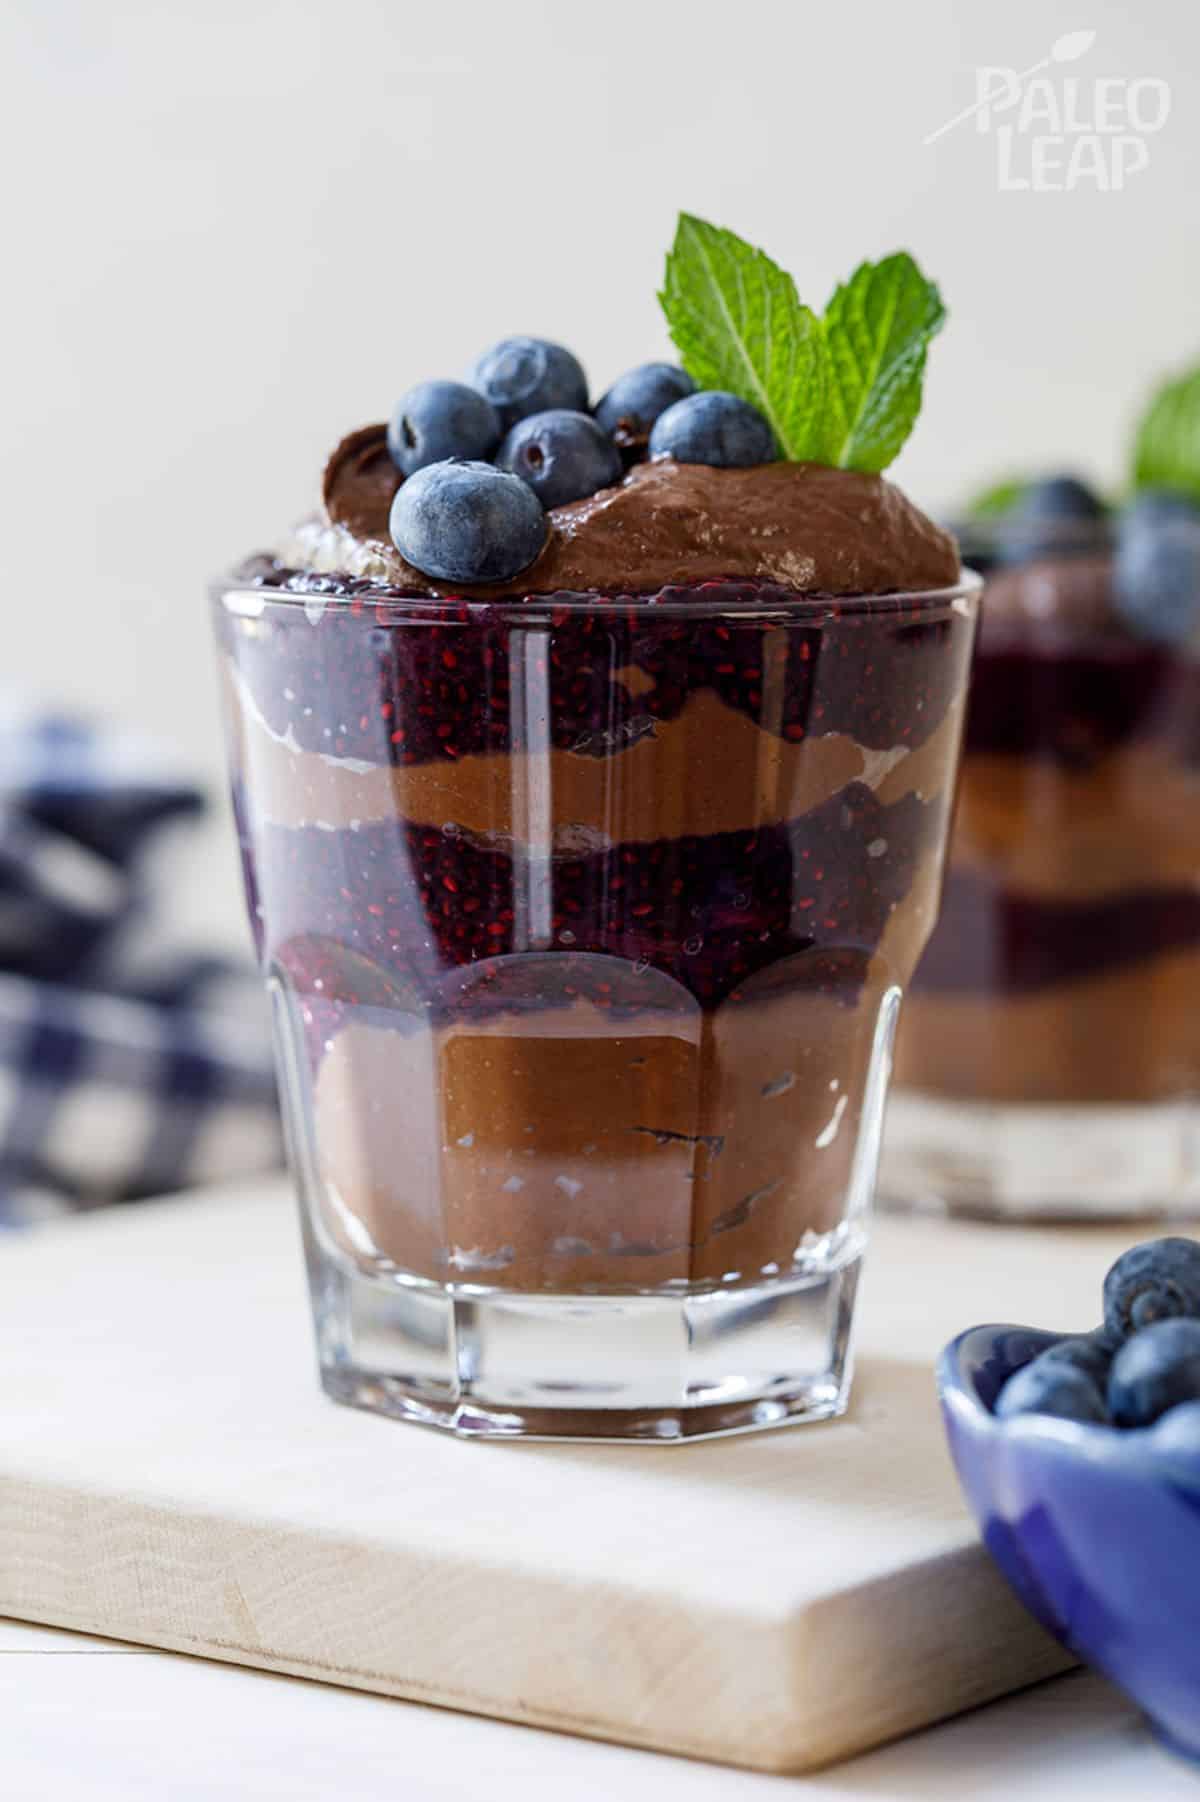 Blueberry Chocolate Chia Parfait in a glass cup.